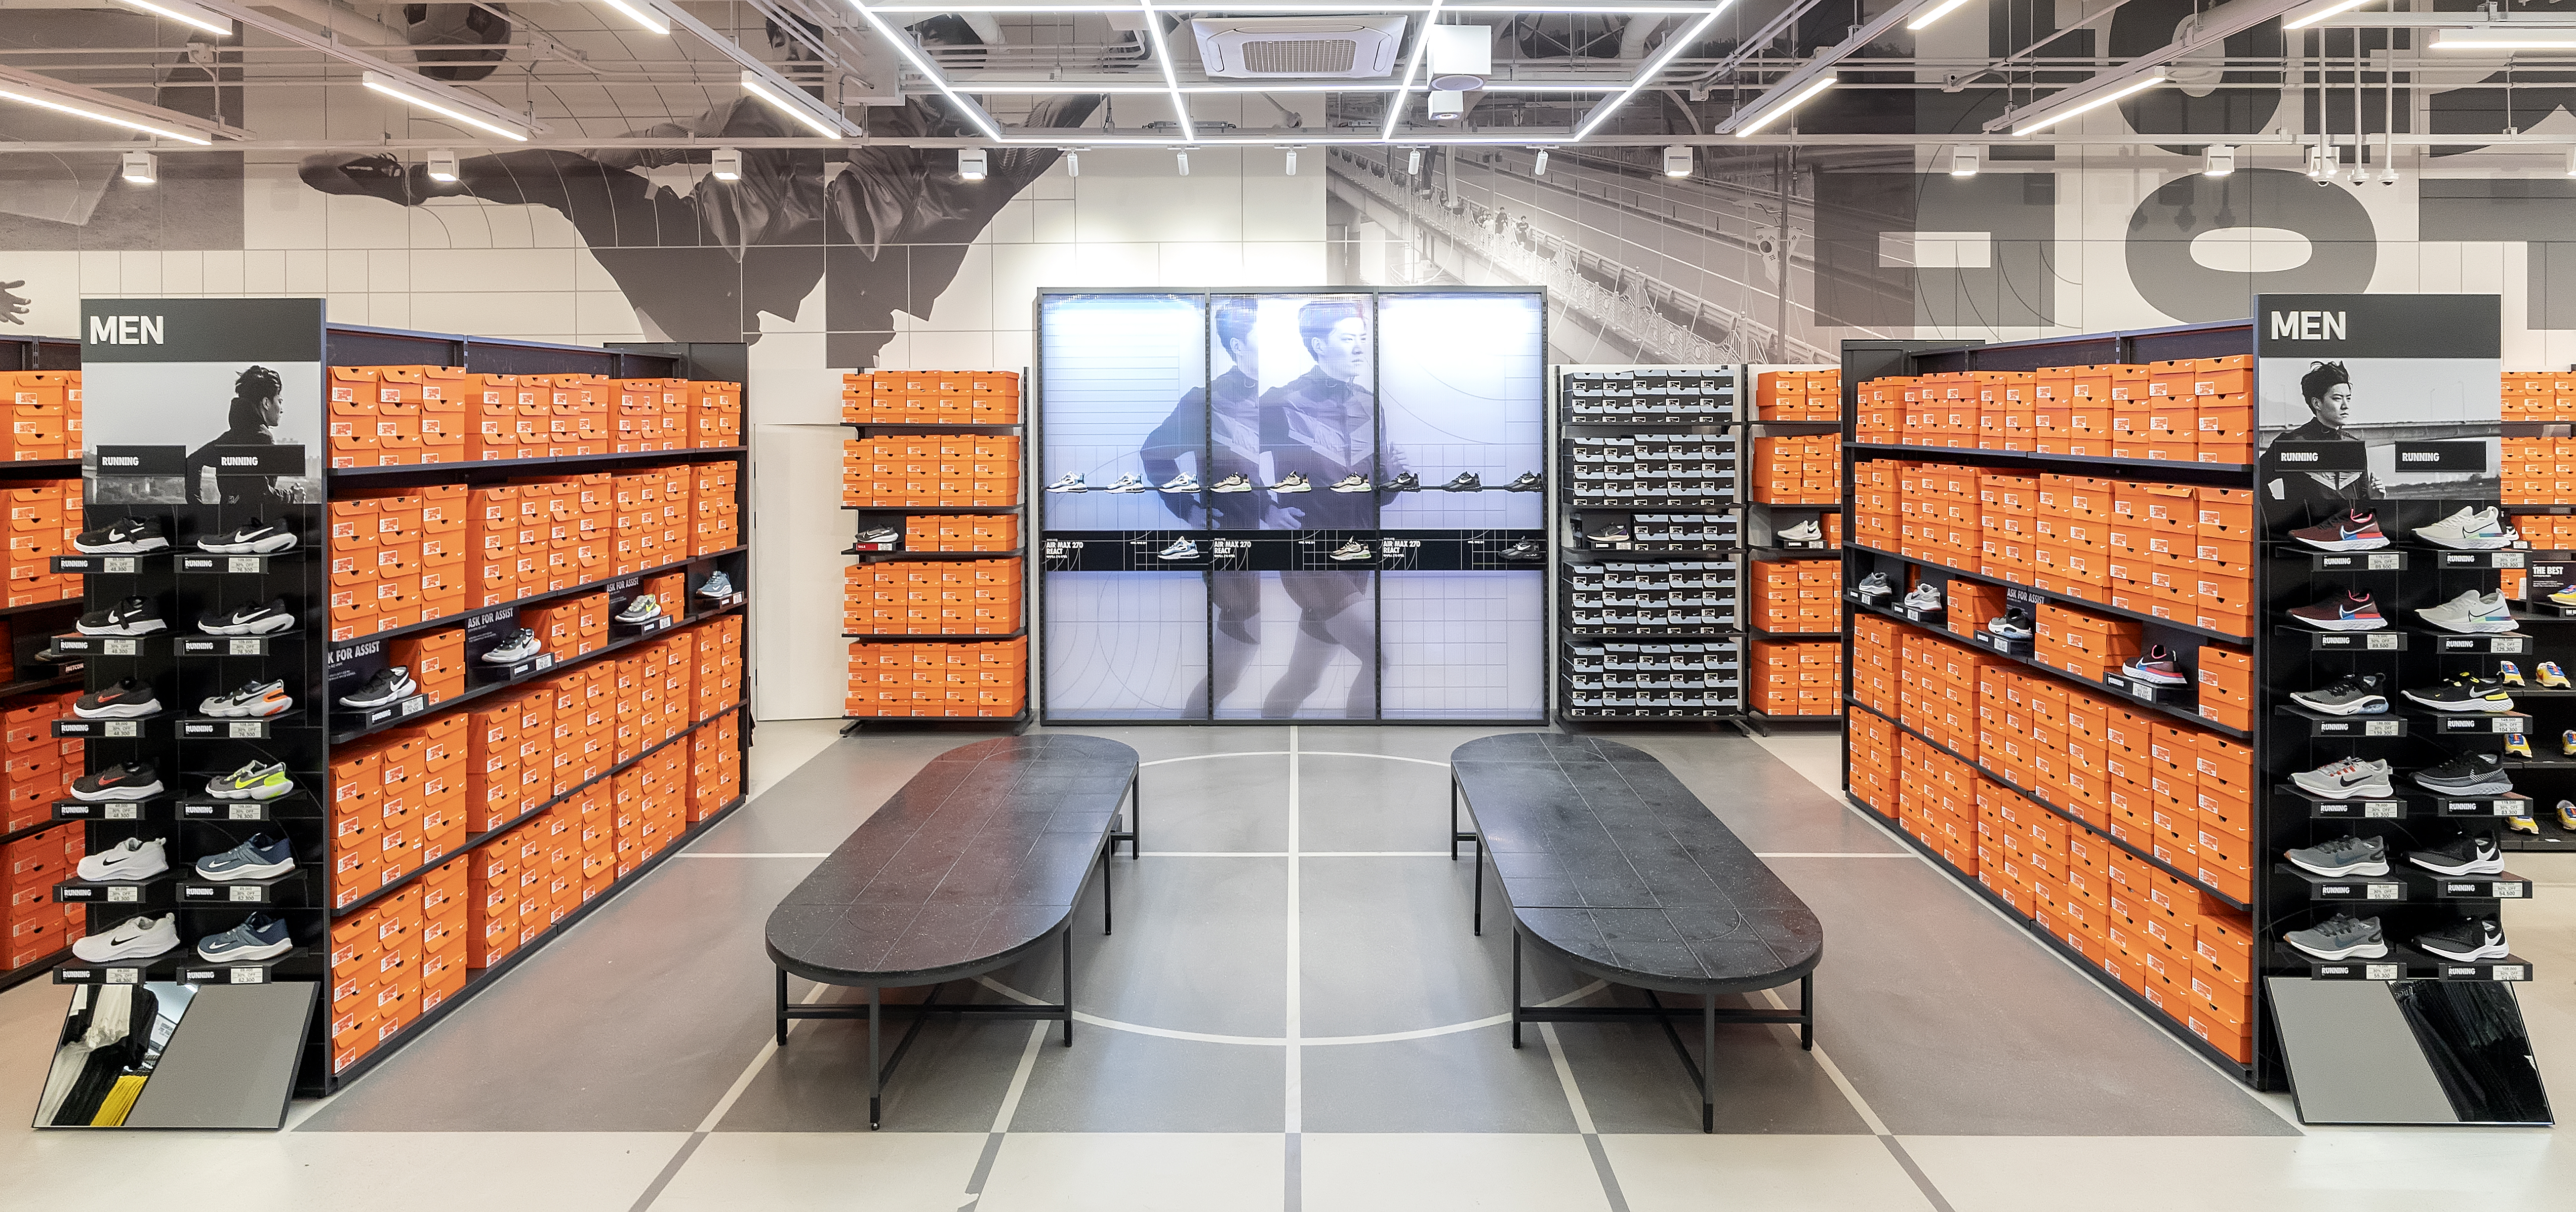 San Antonio one 9 cities in world with new 'Nike Unite' concept store